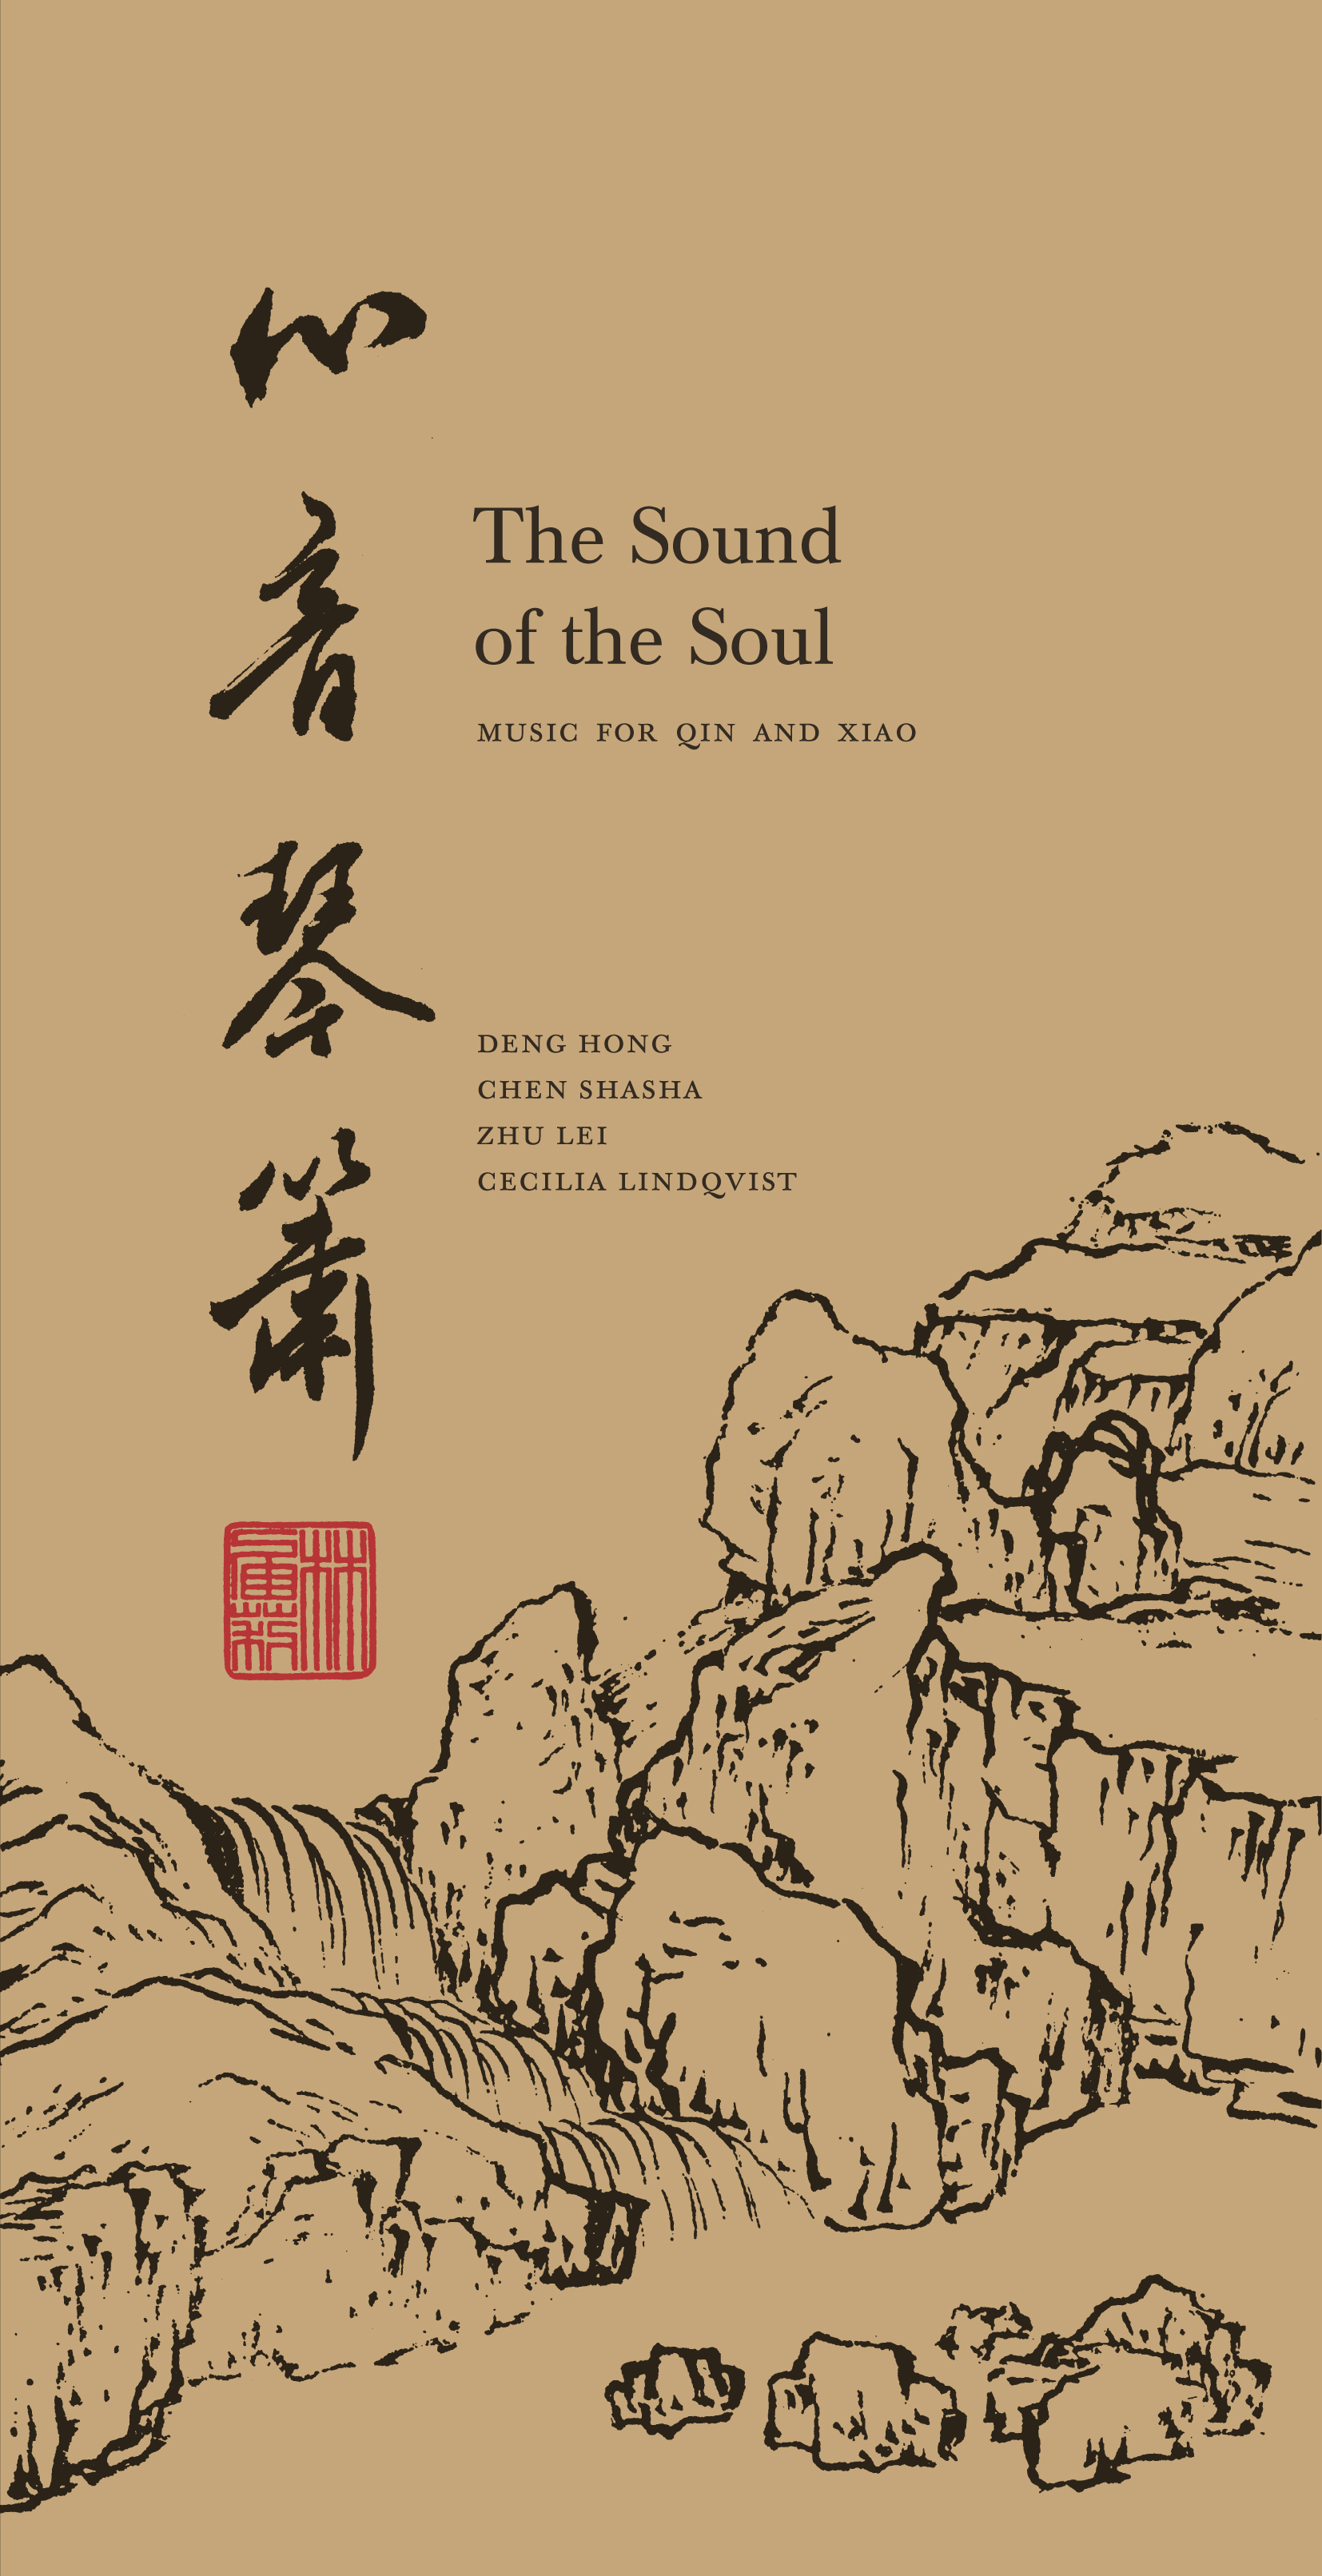 The Sound of the Soul - Music for Qin and Xiao